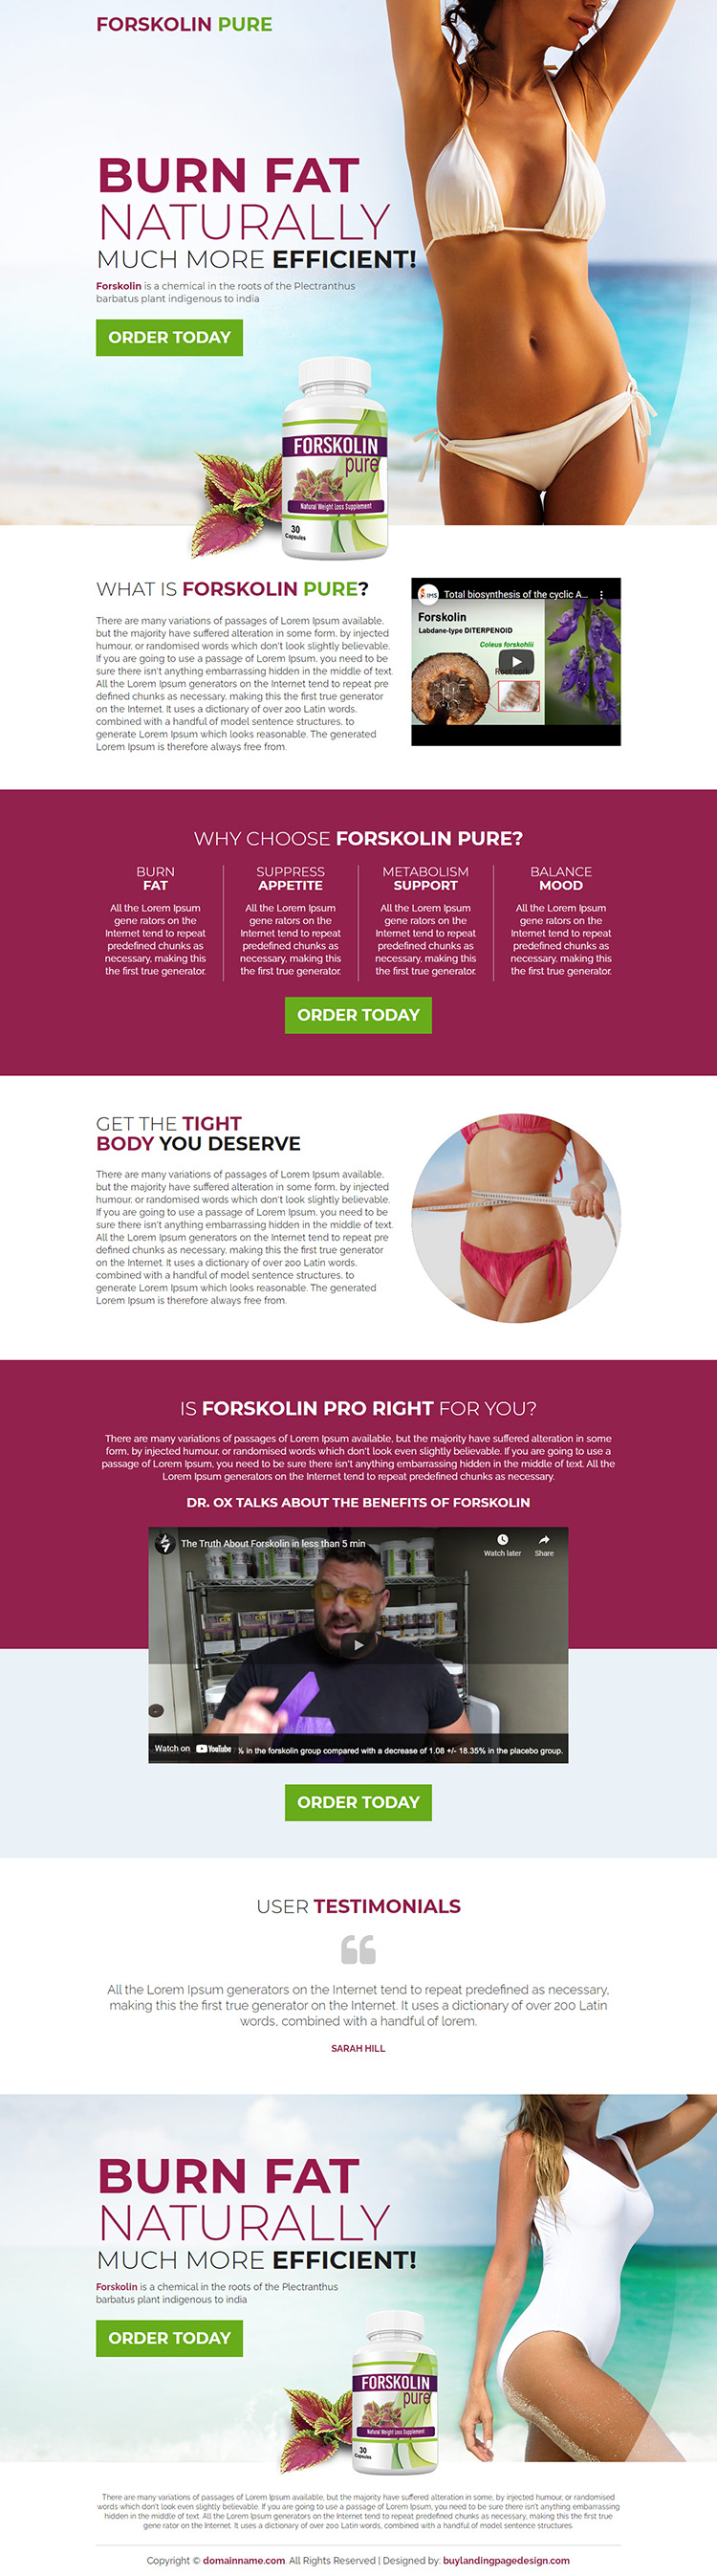 forskolin extract capsules selling responsive landing page design